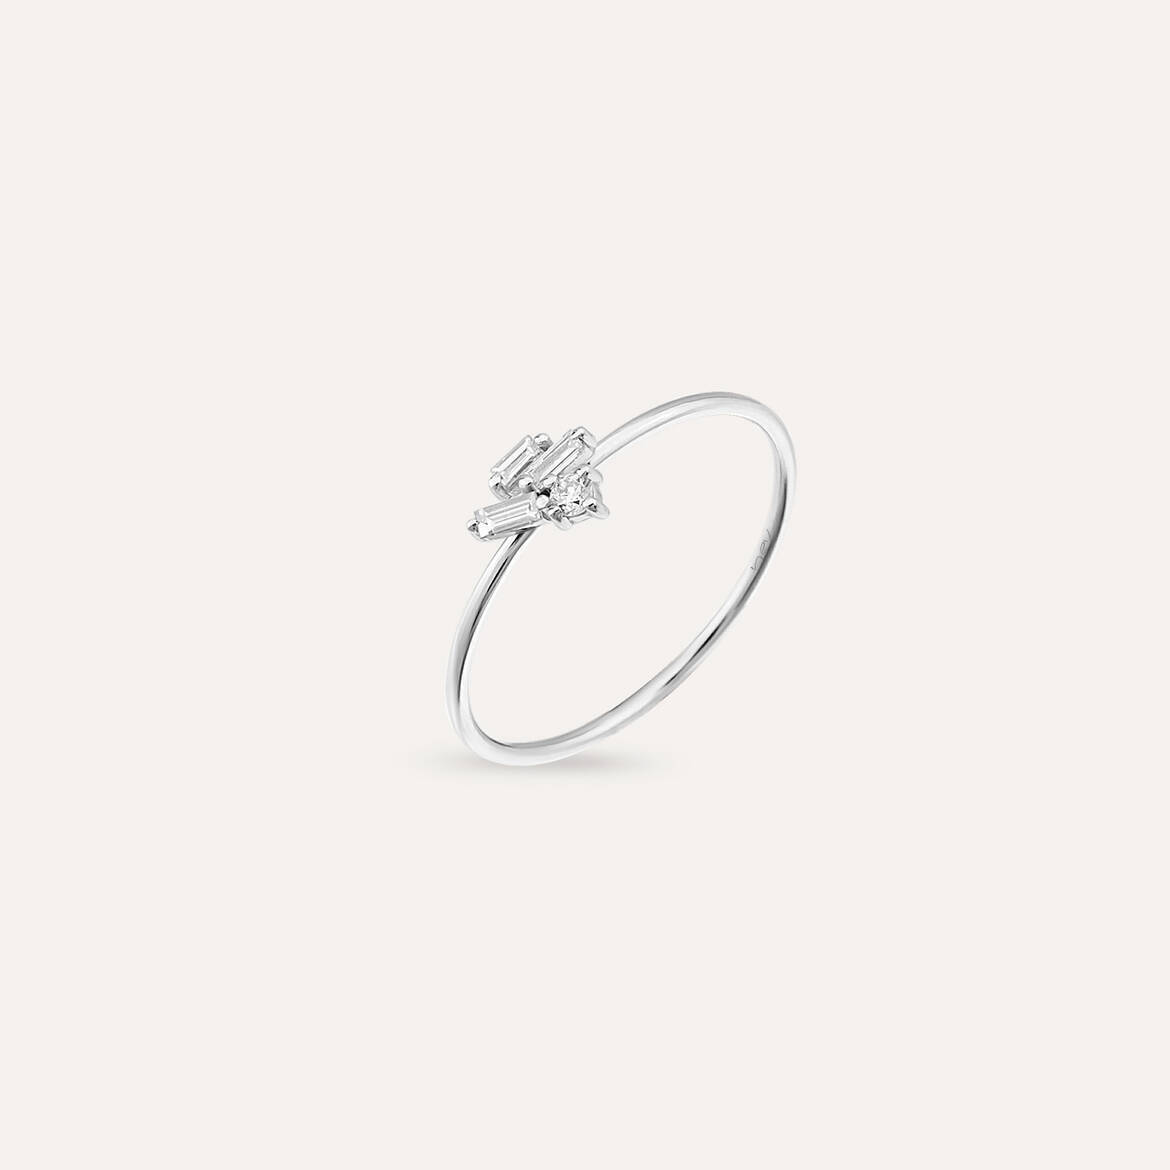 Seed 0.11 CT Baguette Cut Diamond White Gold Ring